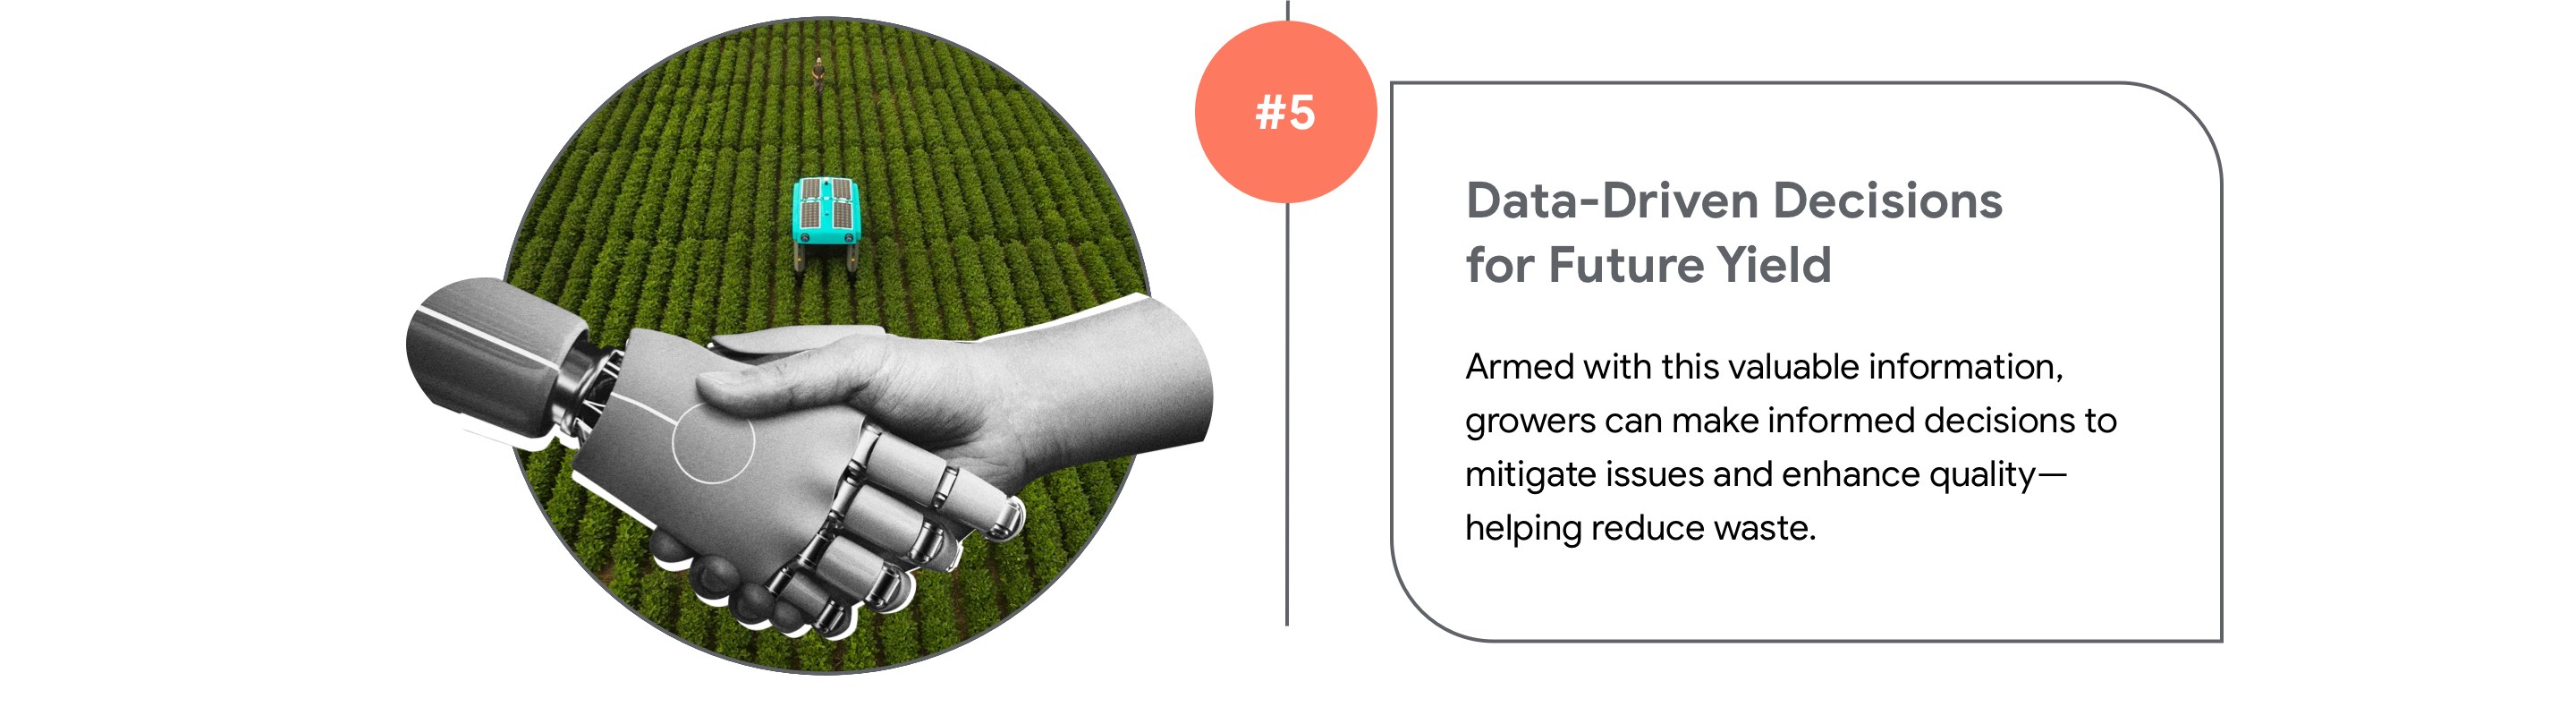 Data-Driven Decisions for Future Yield  Armed with this valuable information, growers can make informed decisions to mitigate issues and enhance quality—helping reduce waste.